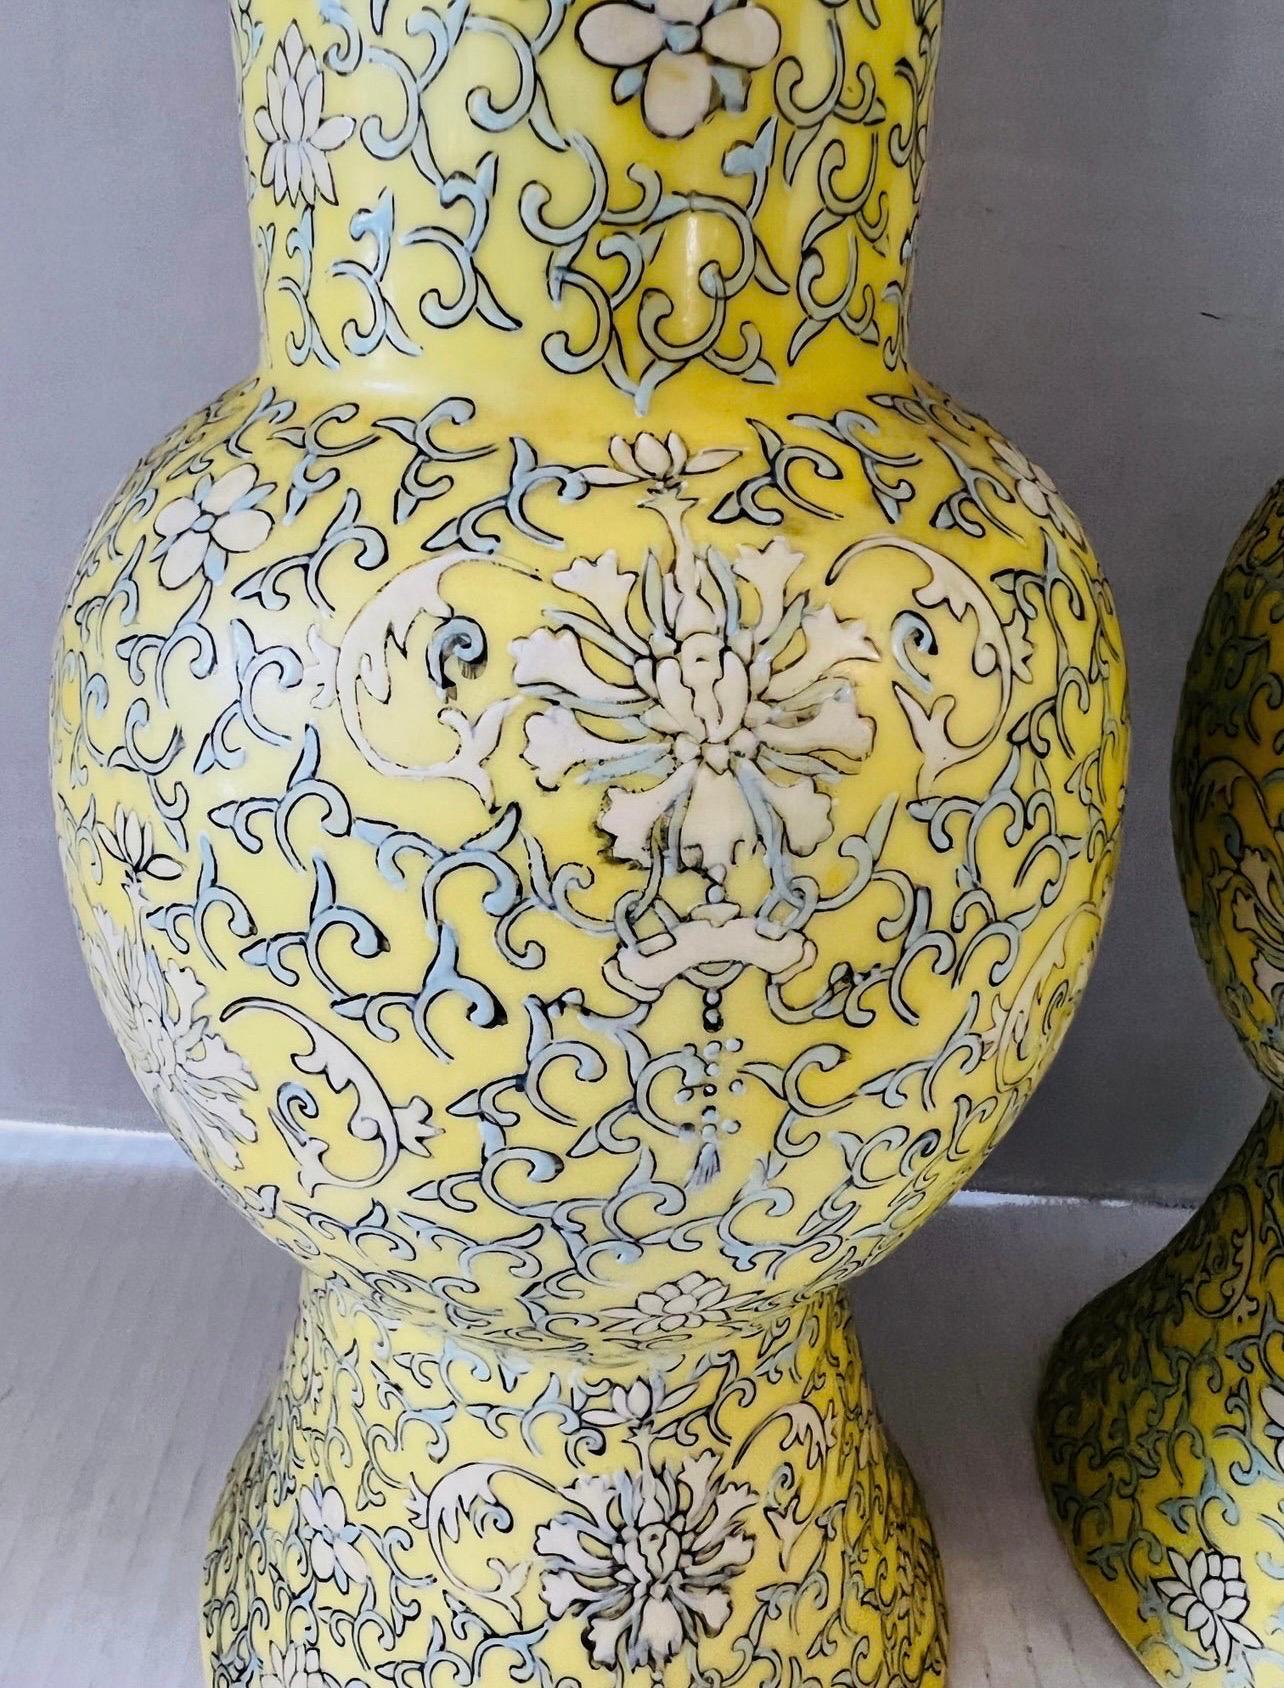 Ceramic Japanese Coveted Yellow Porcelain Three Piece Set Bowl & Pair of Vases Matching